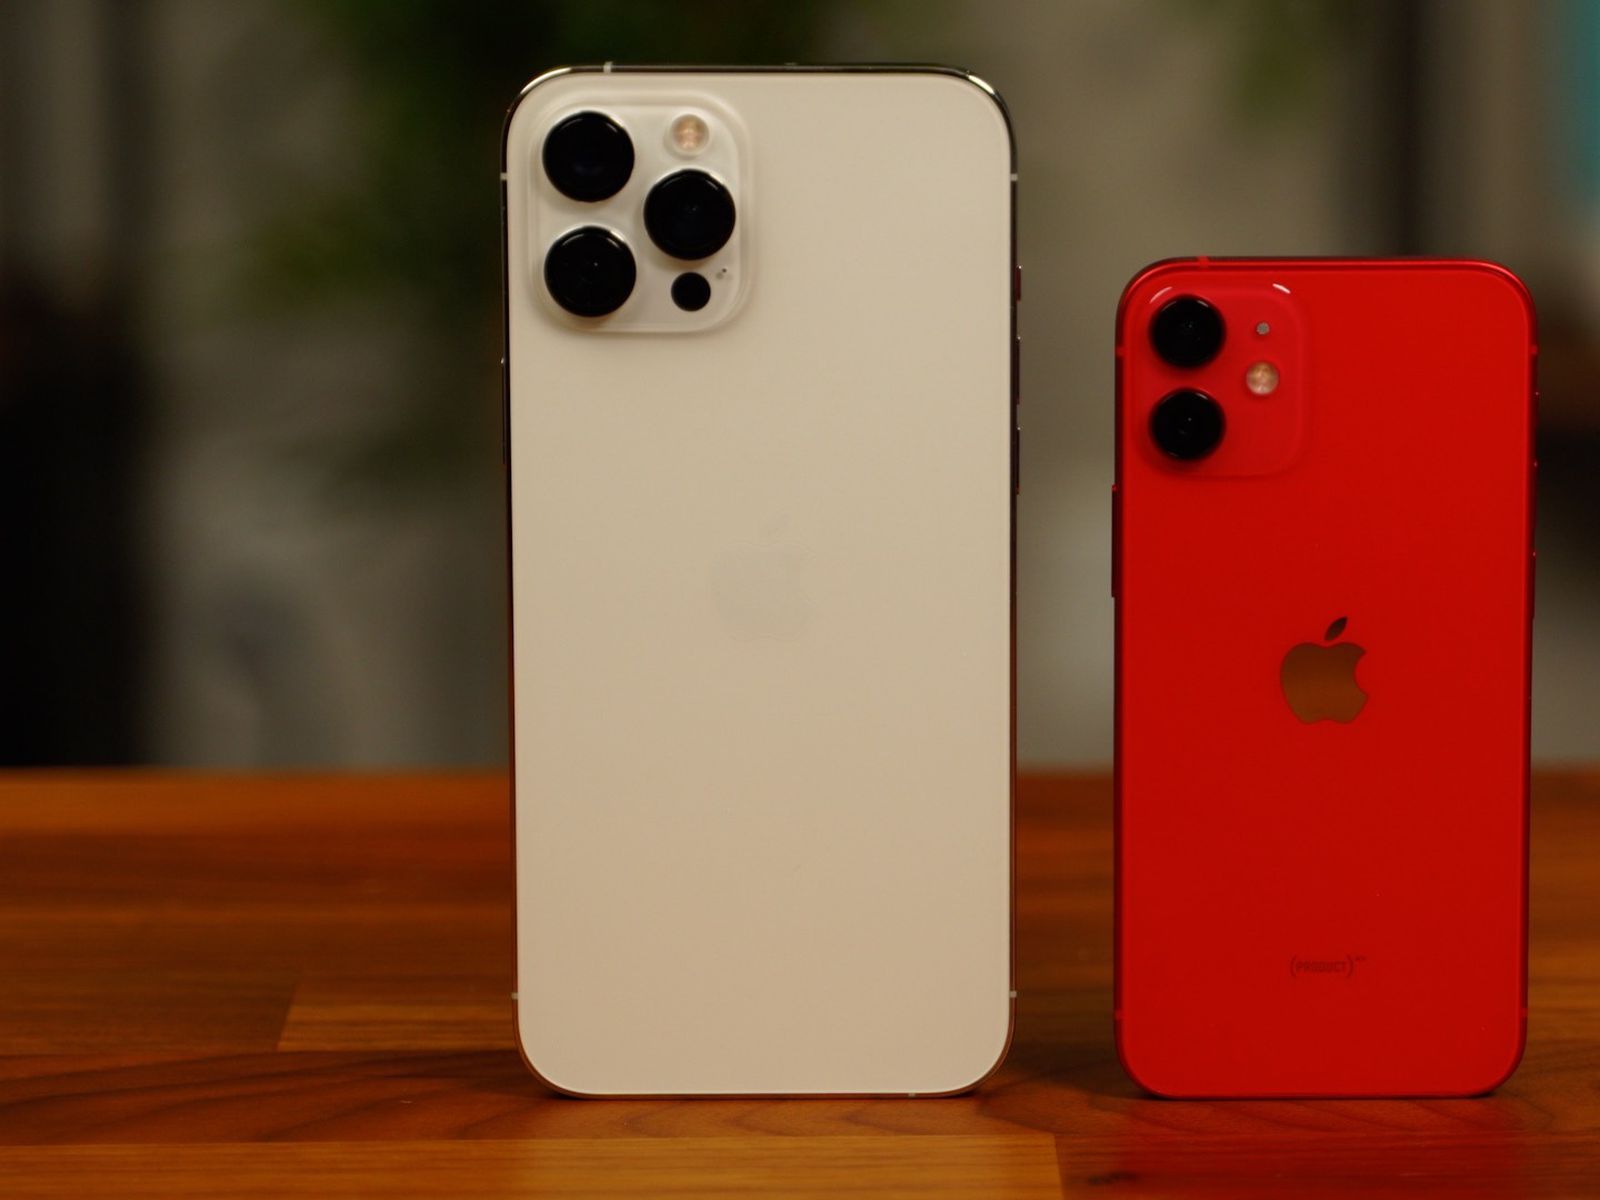 https://images.macrumors.com/t/Iu2bNfoqqOr9GbRy62p7-ctyooQ=/1600x1200/smart/article-new/2020/11/iphone-12-mini-pro-max-side-by-side.jpg